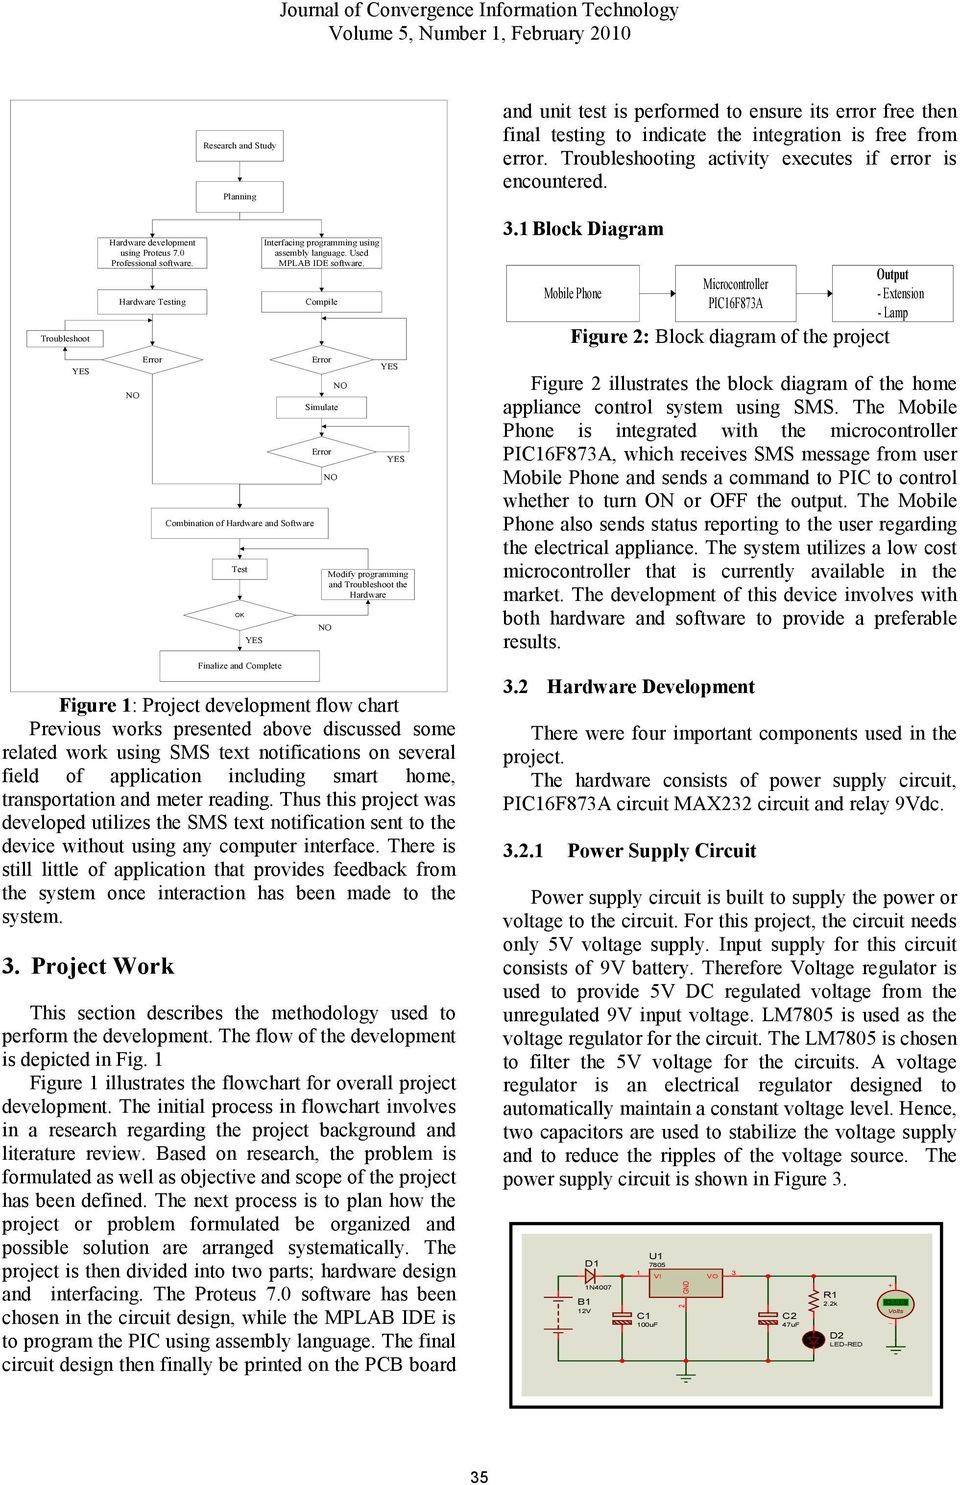 Compile Error Simulate Error Modify programming and Troubleshoot the Hardware Figure 1: Project development flow chart Previous works presented above discussed some related work using SMS text